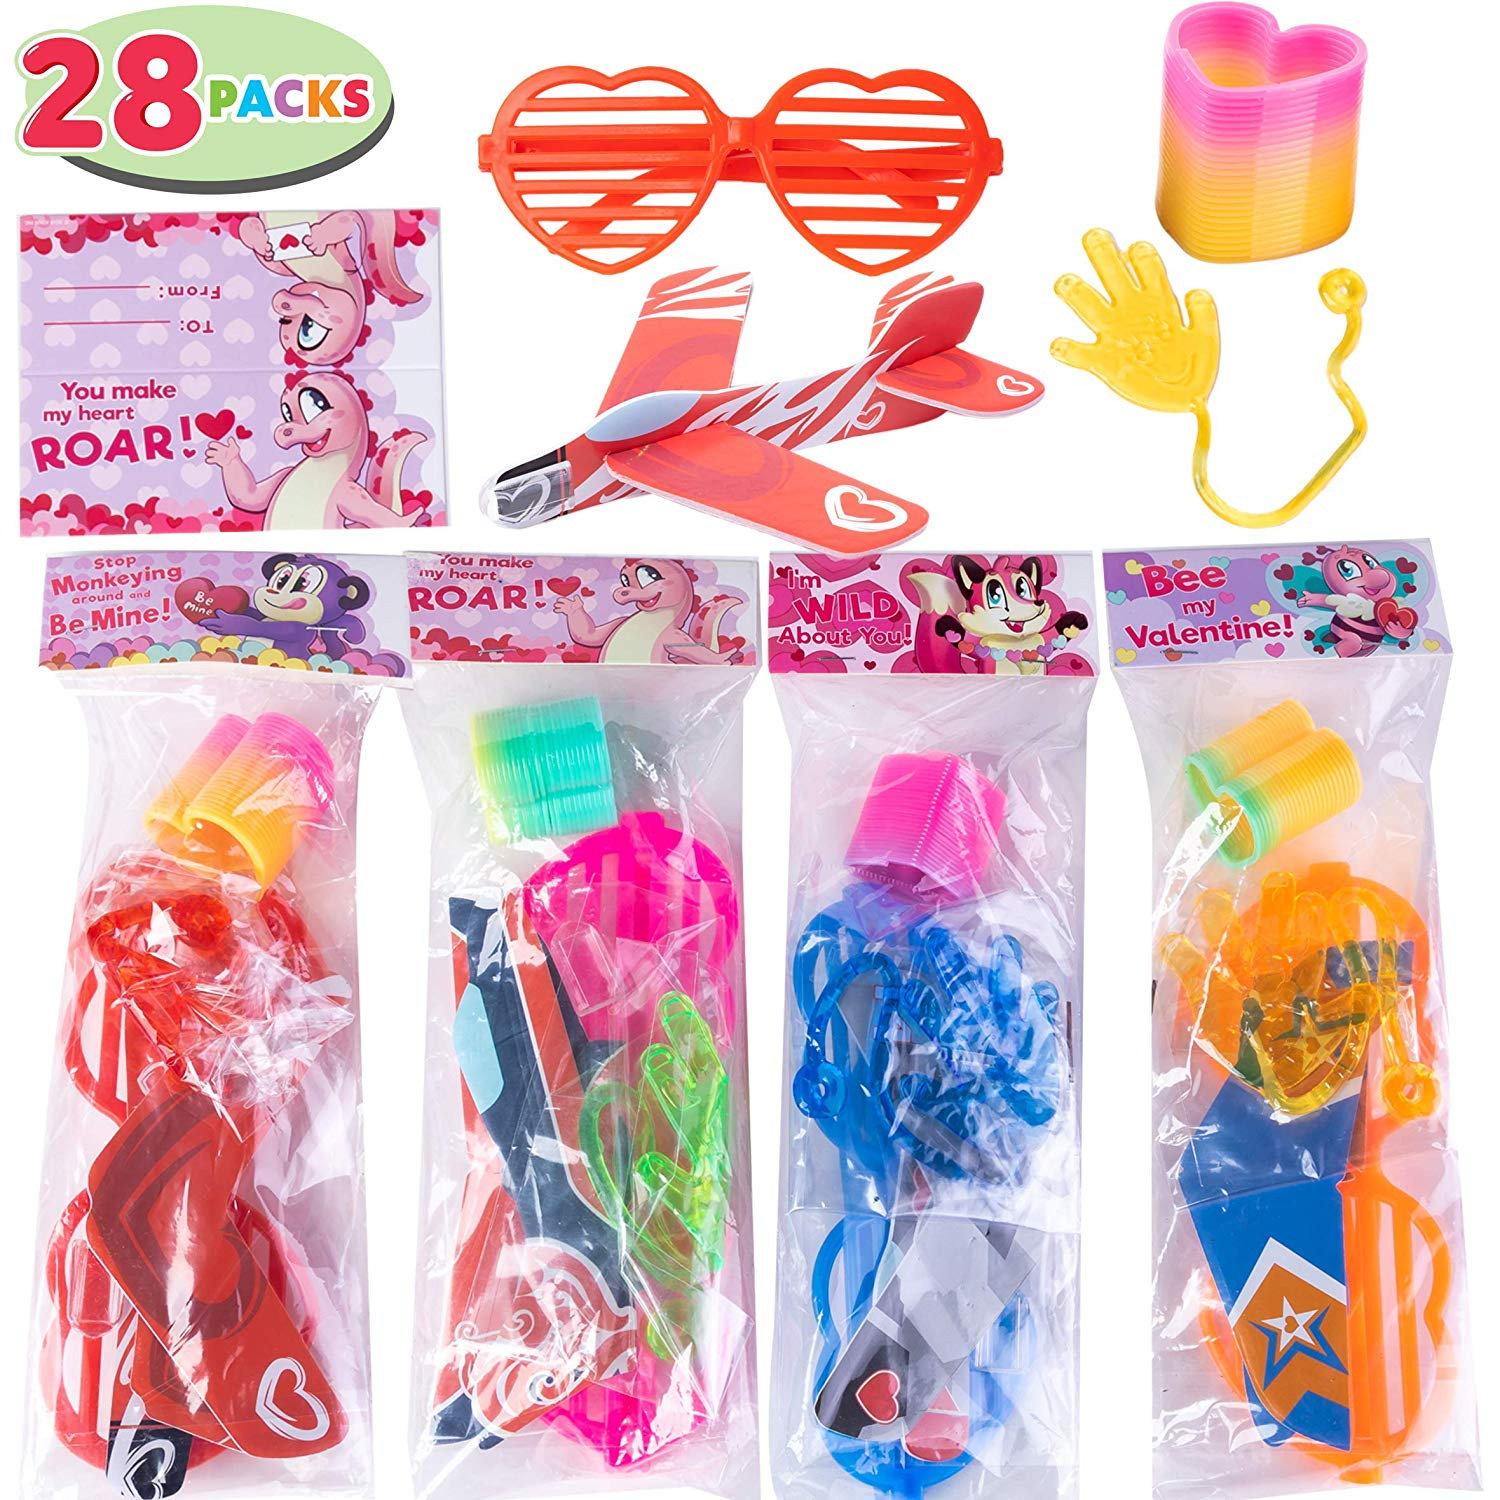 Valentine'S Day Gift Ideas For School
 Valentines Day Classroom Gifts 28 Pack Kids Valentines